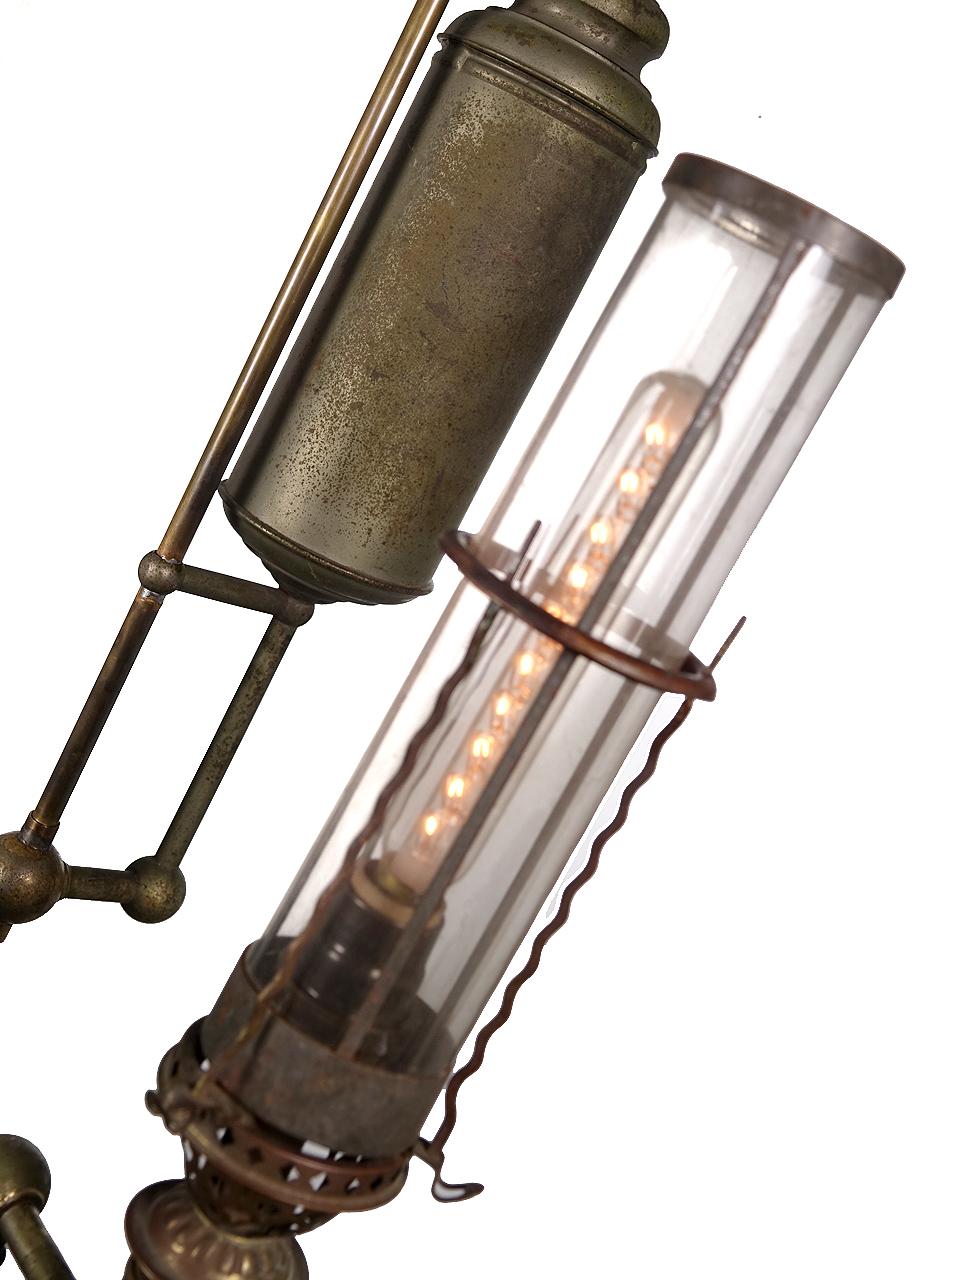 This is a large and dramatic nickel-plated lamp. It's very unusual and not the type of lamp you will find electrified. It's only 8 inches deep but has a 21 inch spread. The 2 original tubular shades are real Mica. Its a unique and very unusual